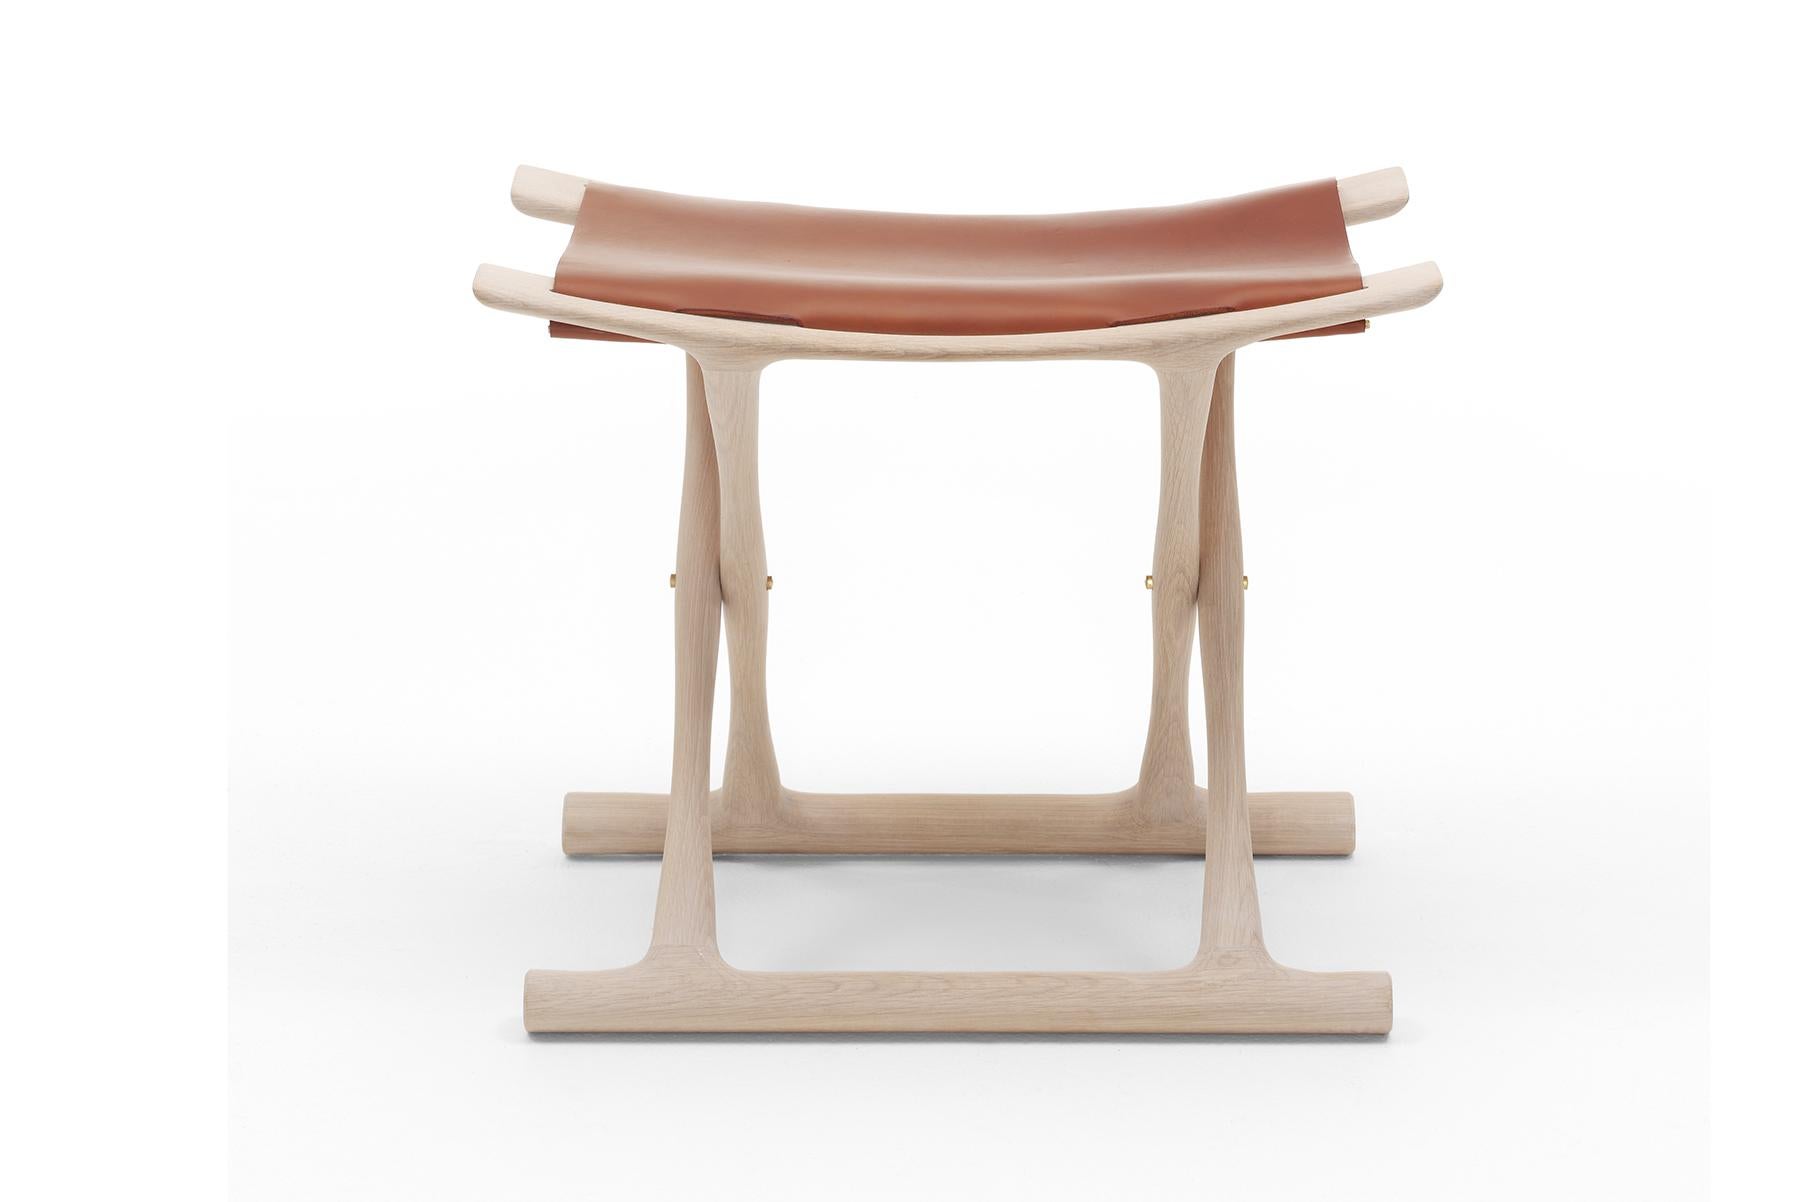 The OW2000 Egyptian Stool by Ole Wanscher exemplifies his creative vision and masterful touch. The stool is crafted from quality, natural materials that express his passion for exploration and original thought.